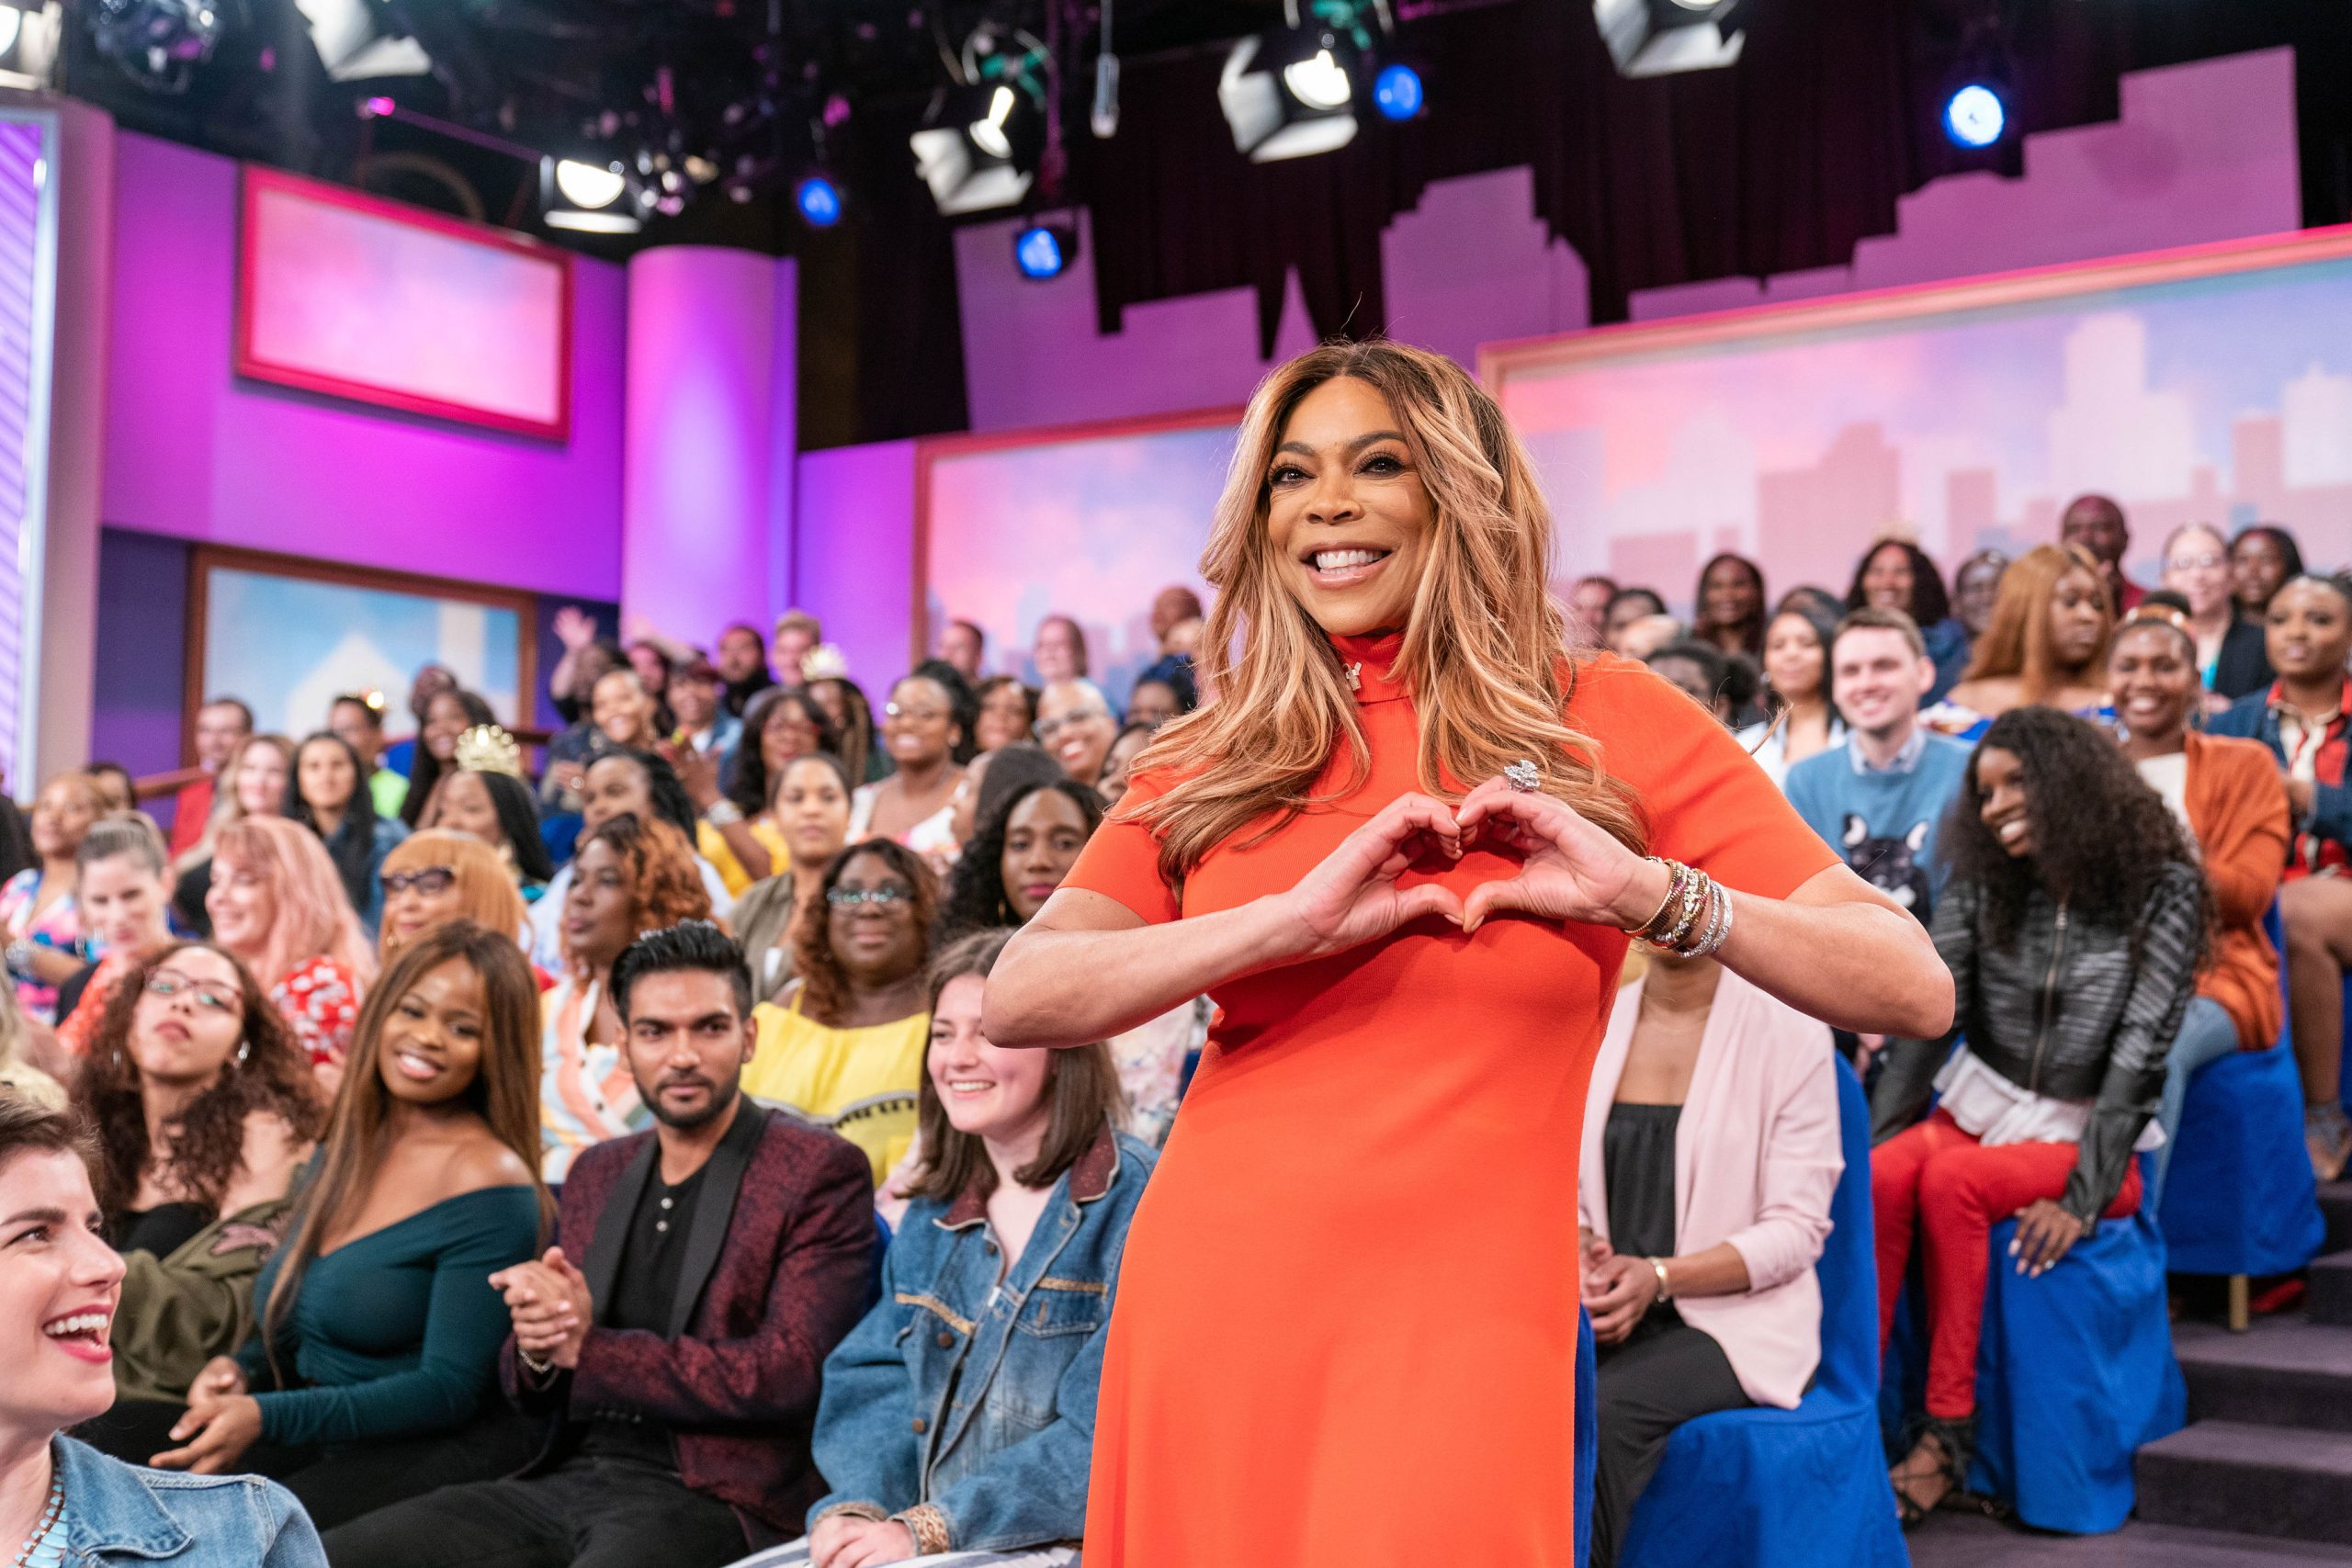 “Wendy Williams Show” Paying People To Sit In The Audience